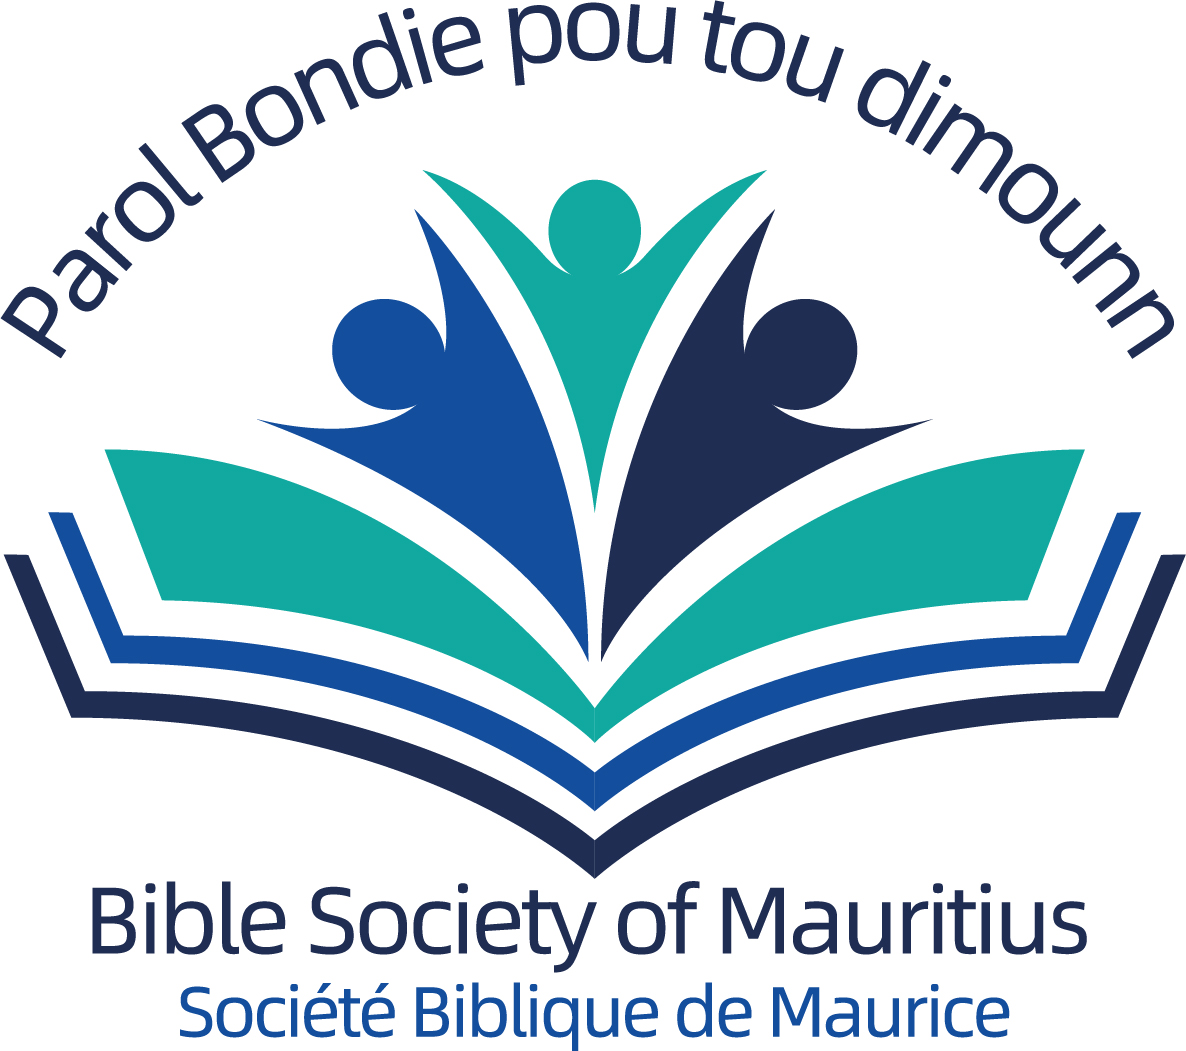 The Bible Society of Mauritius